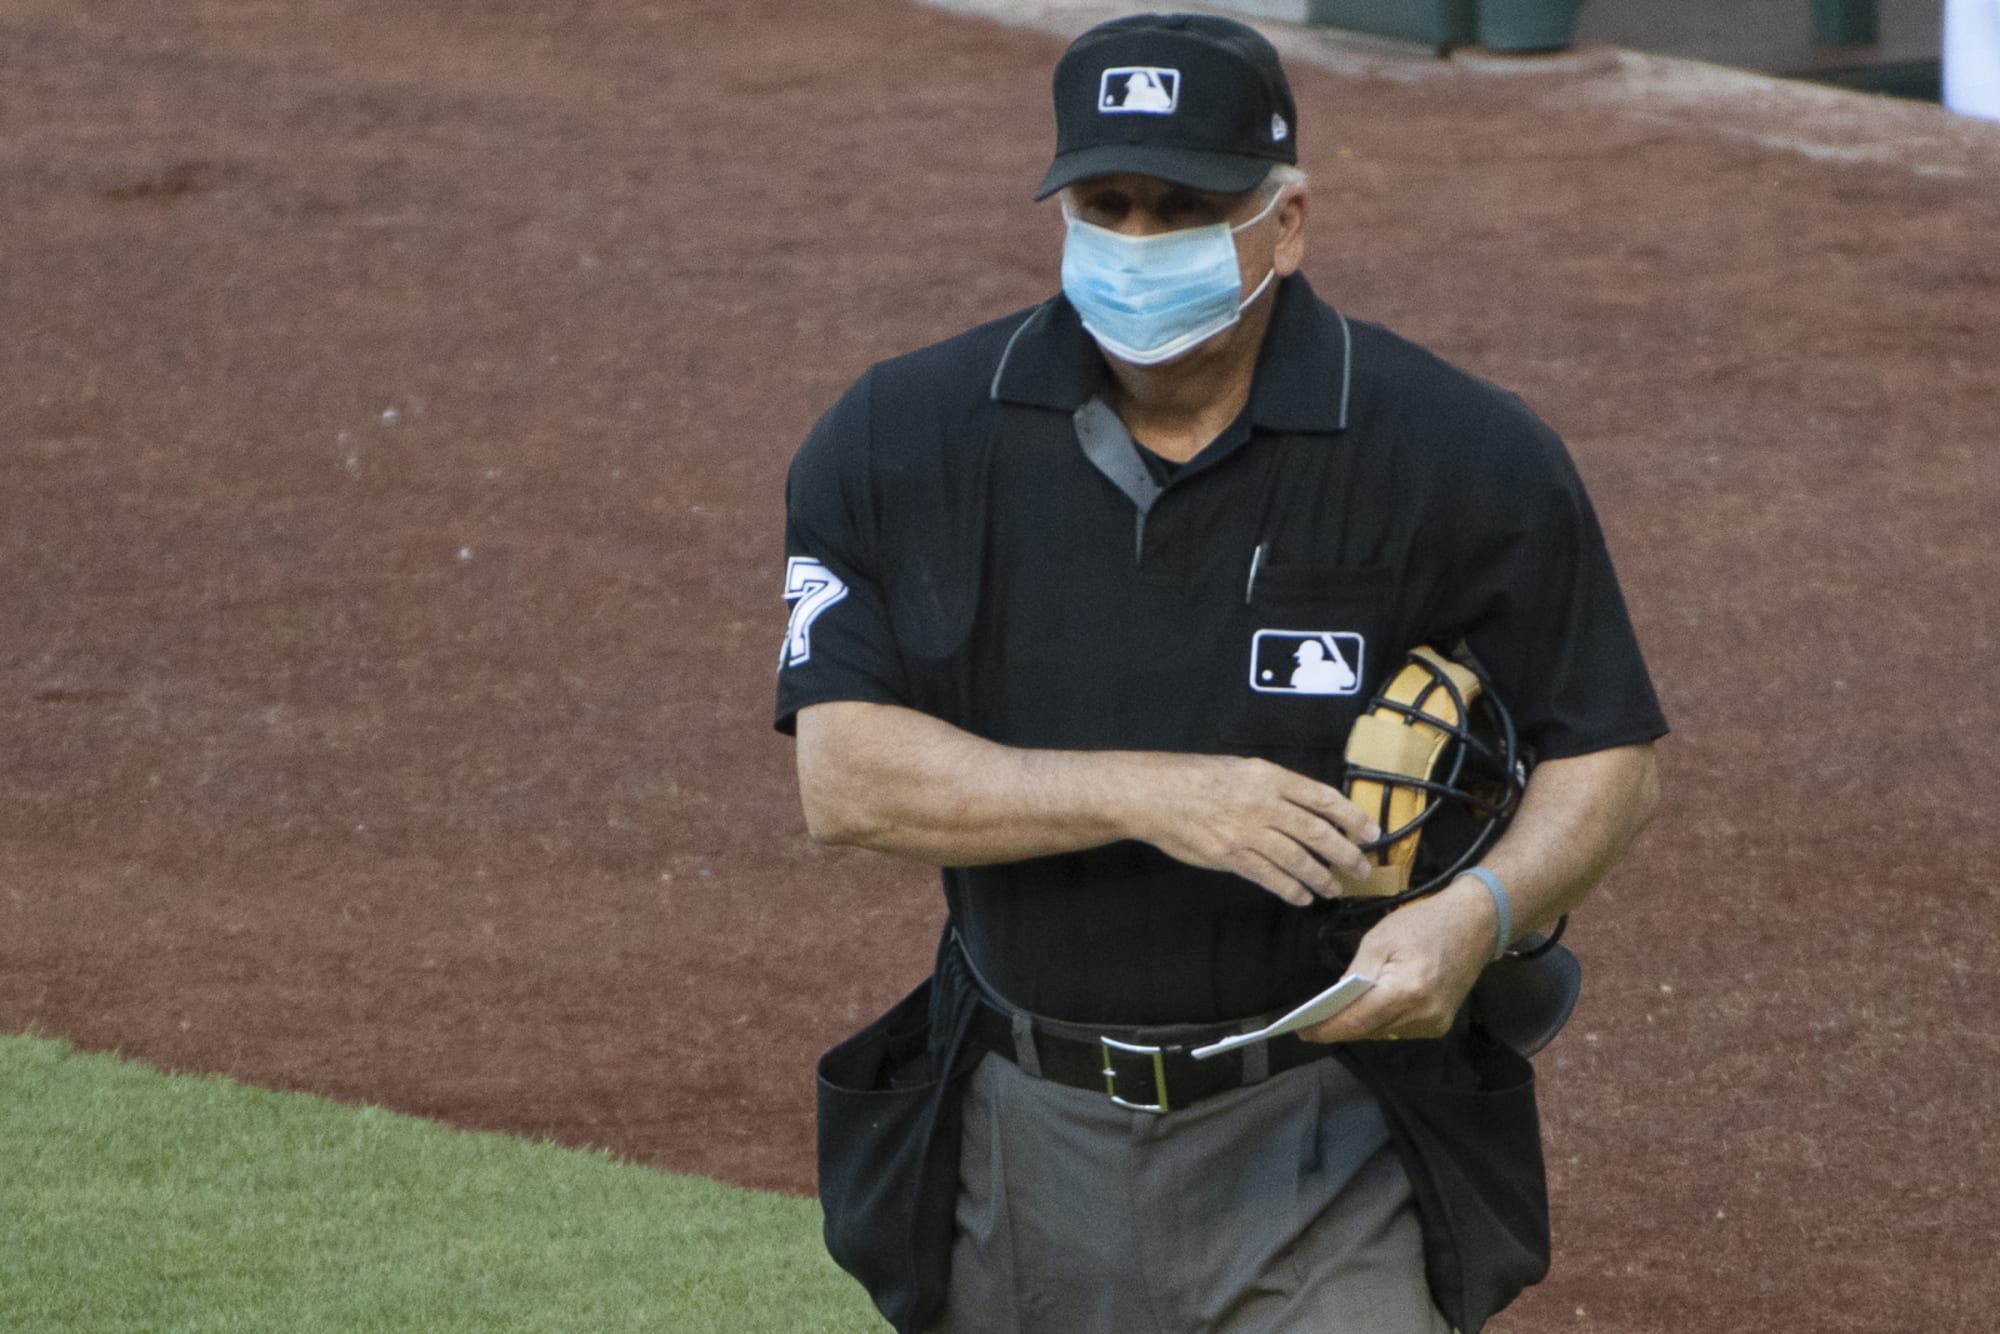 White Sox fan has savage insult for home plate ump Larry Vanover